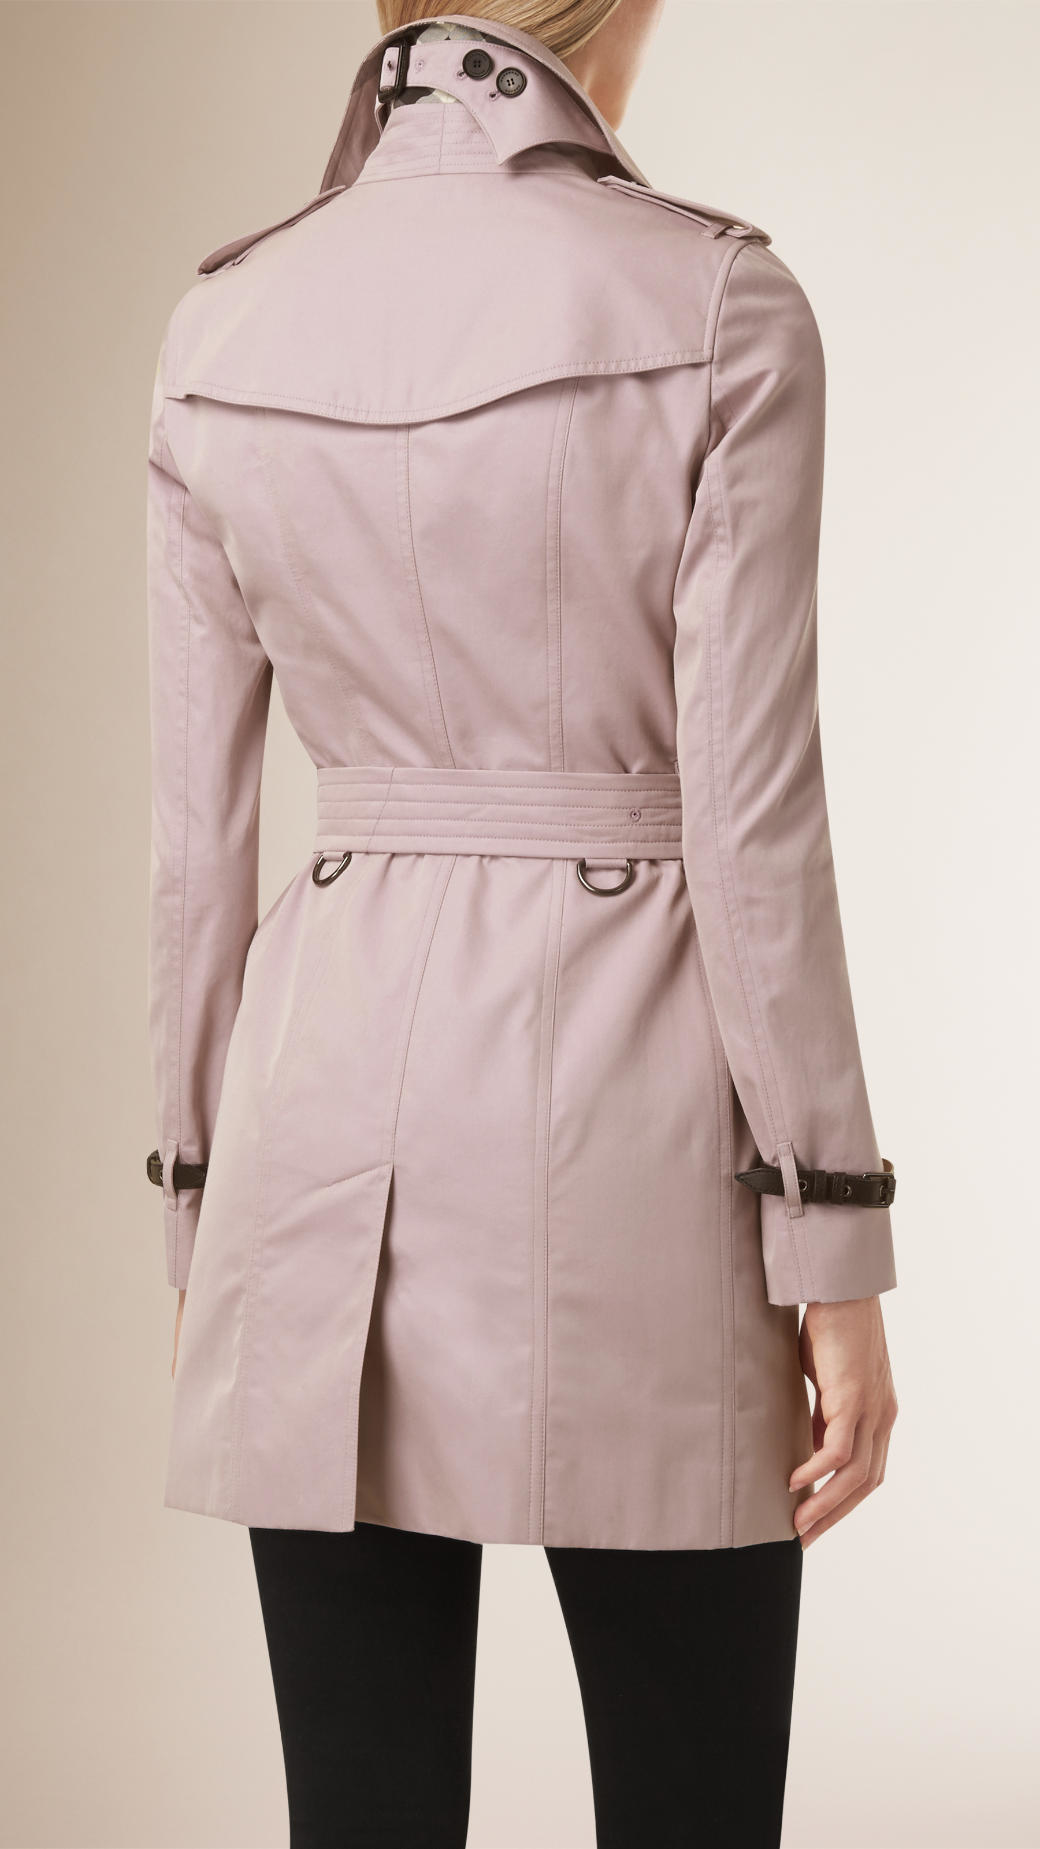 Lyst - Burberry Leather Trim Cotton Gabardine Trench Coat Pale Mauve in ...